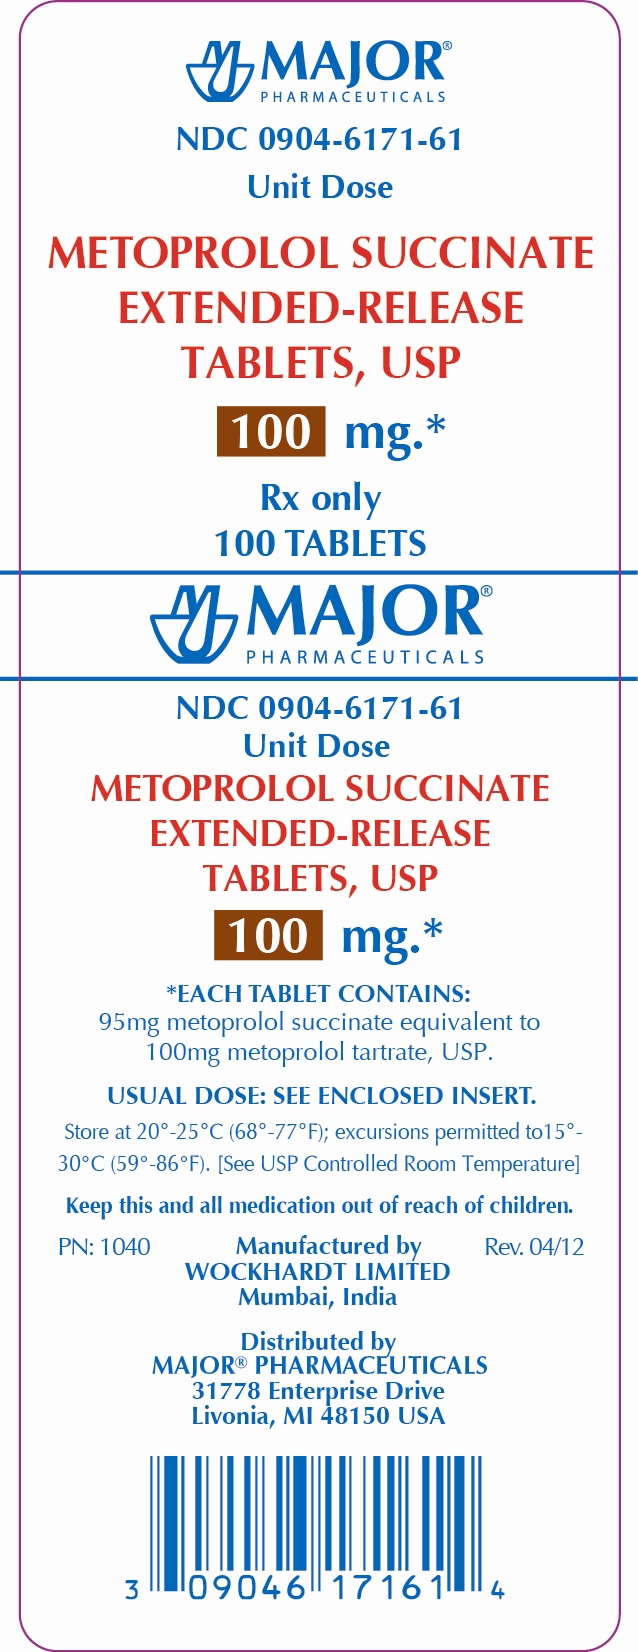 METOPROLOL SUCCINATE EXTENDED-RELEASE TABLETS, USP 100MG